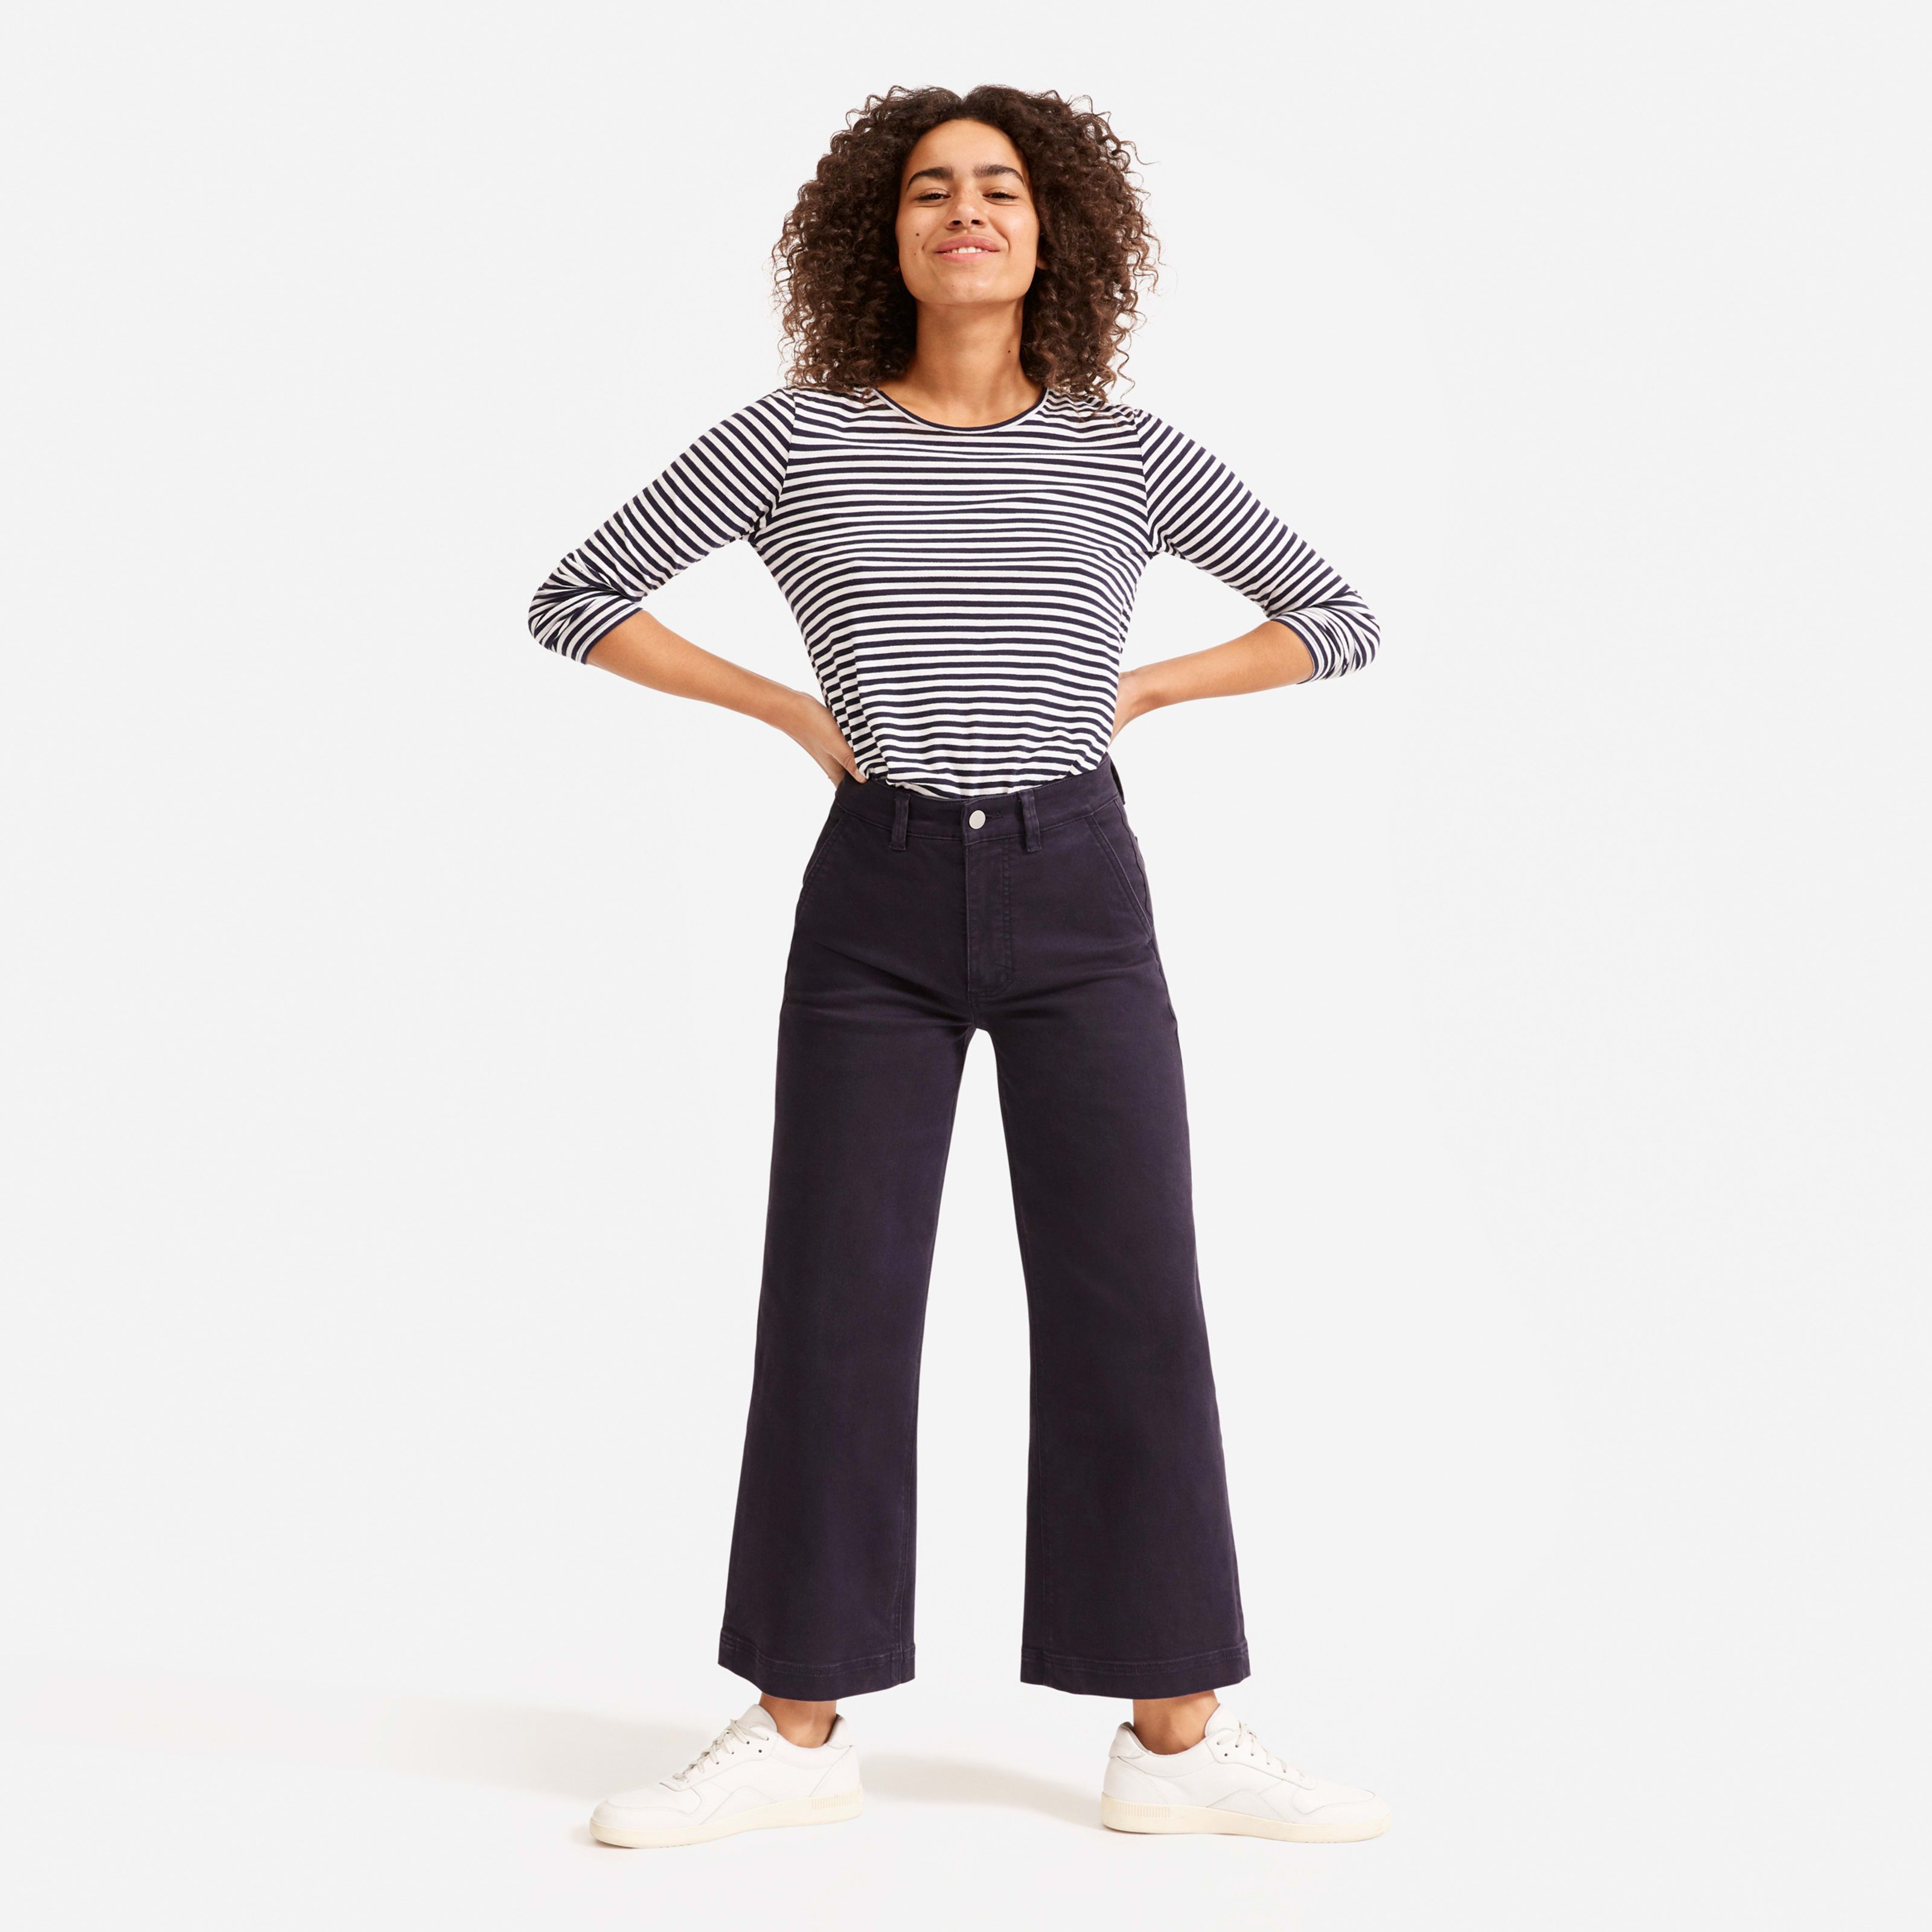 Women's Wide-Leg Crop Pant by Everlane in Navy, Size 0 | Everlane